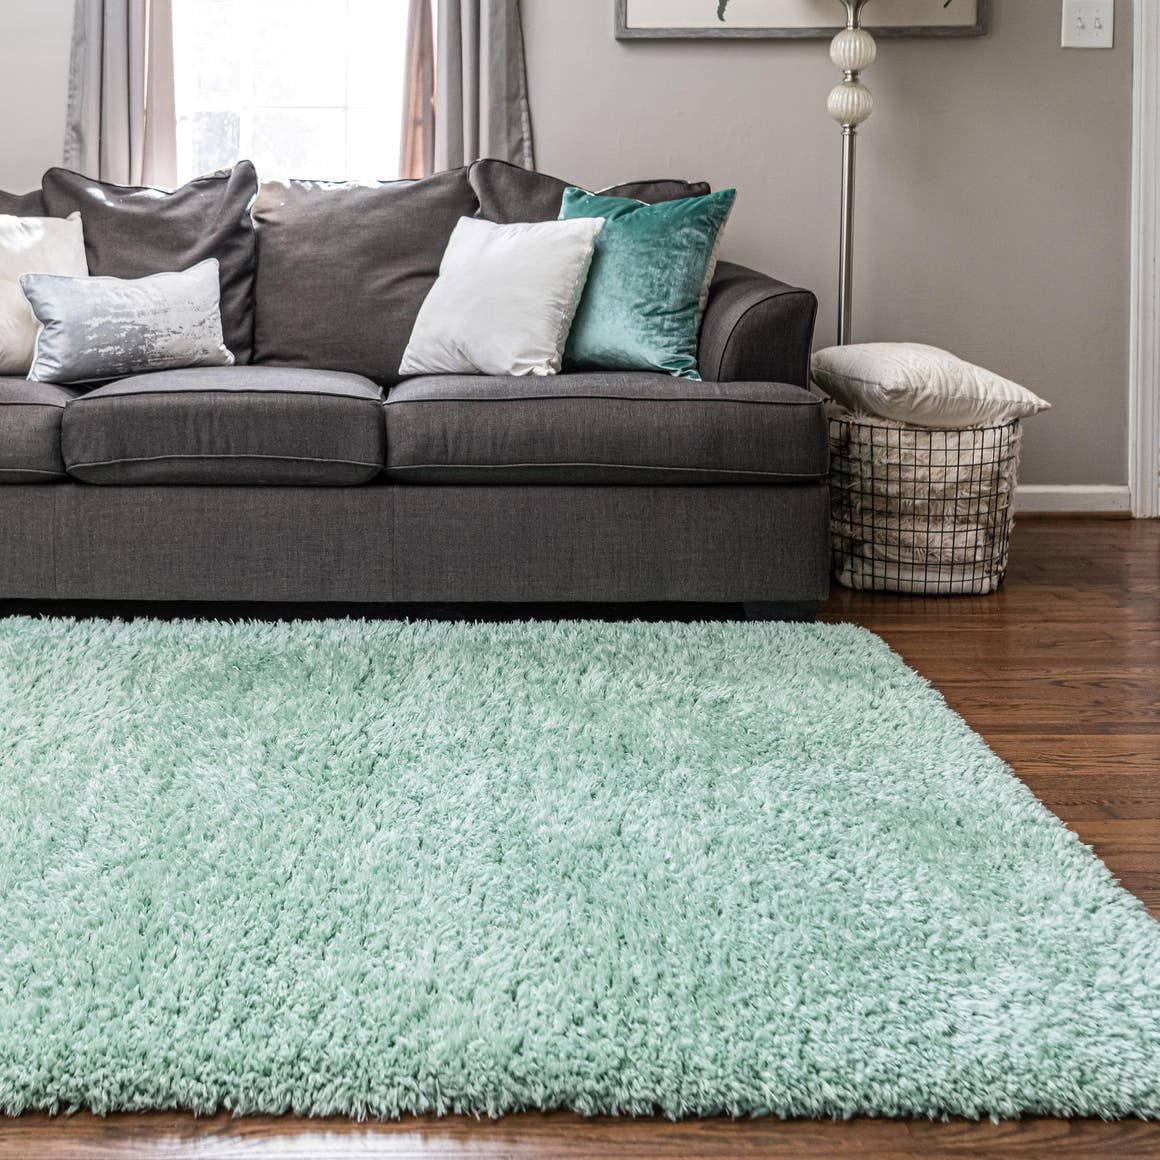 Infinity Collection Solid Shag Area Rugrugs – Cyan 9' X 12'  High Pile Plush Shag Rug Perfect For Living Rooms, Bedrooms, Dining Rooms  And More – Walmart Regarding Ash Infinity Shag Rugs (View 13 of 15)